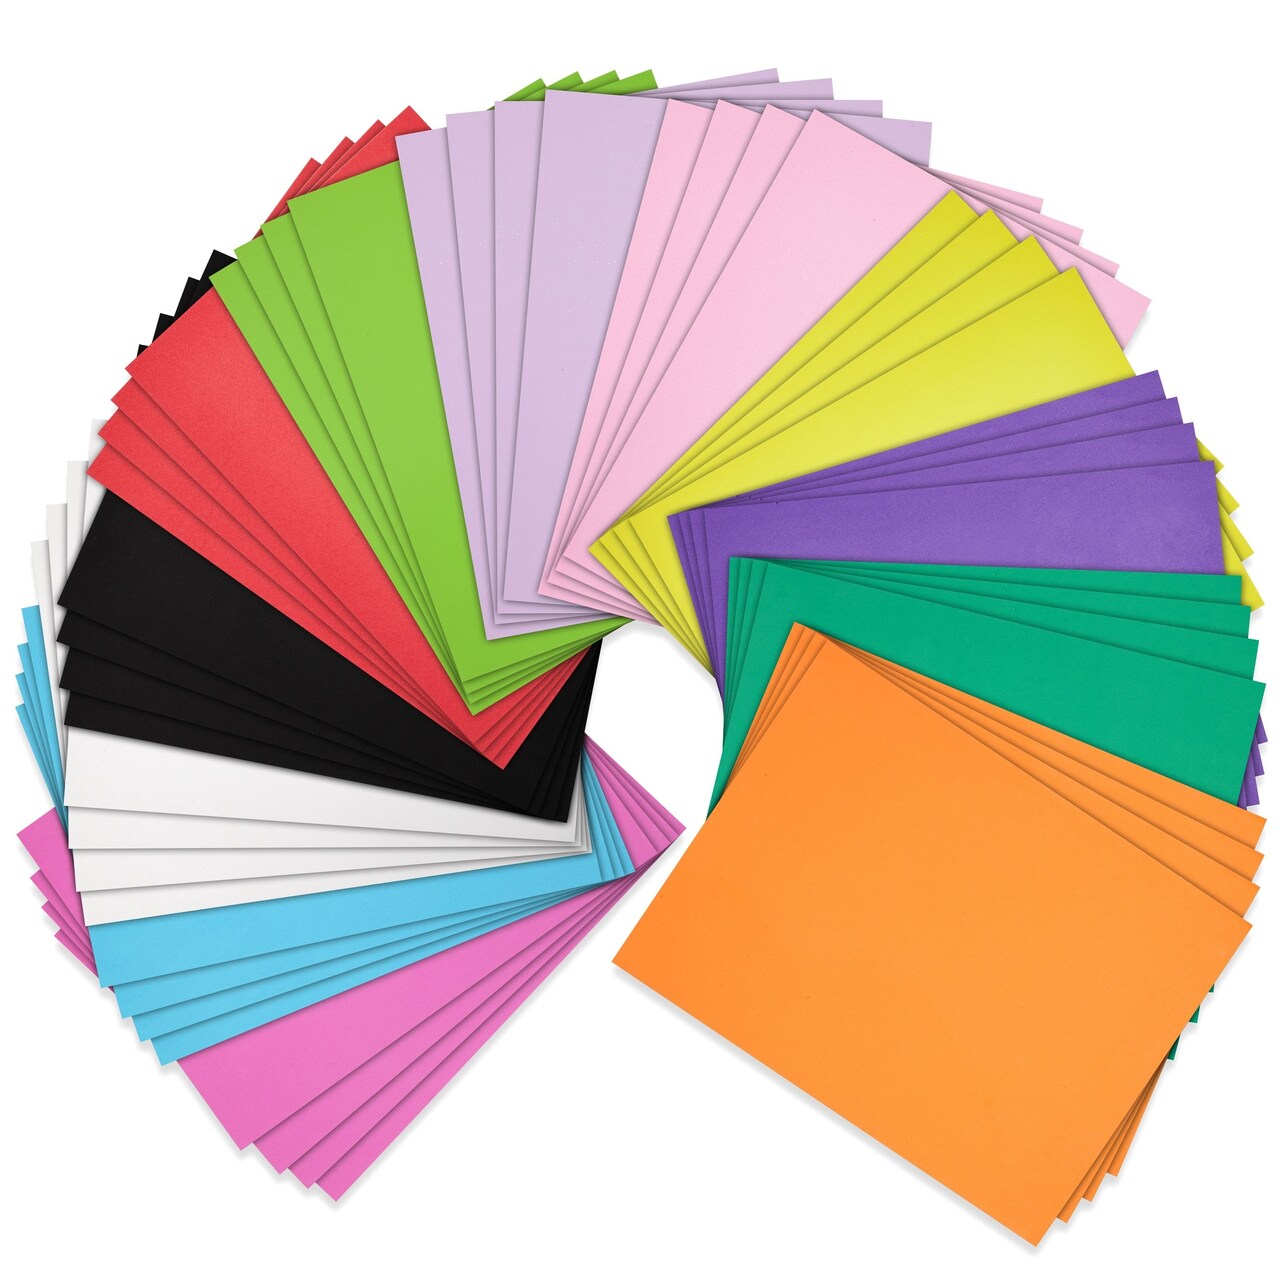 48 Pack Multicolored 2mm EVA Foam Paper Sheets for DIY Cosplay, Costumes,  Arts and Crafts Projects (9x12 In)